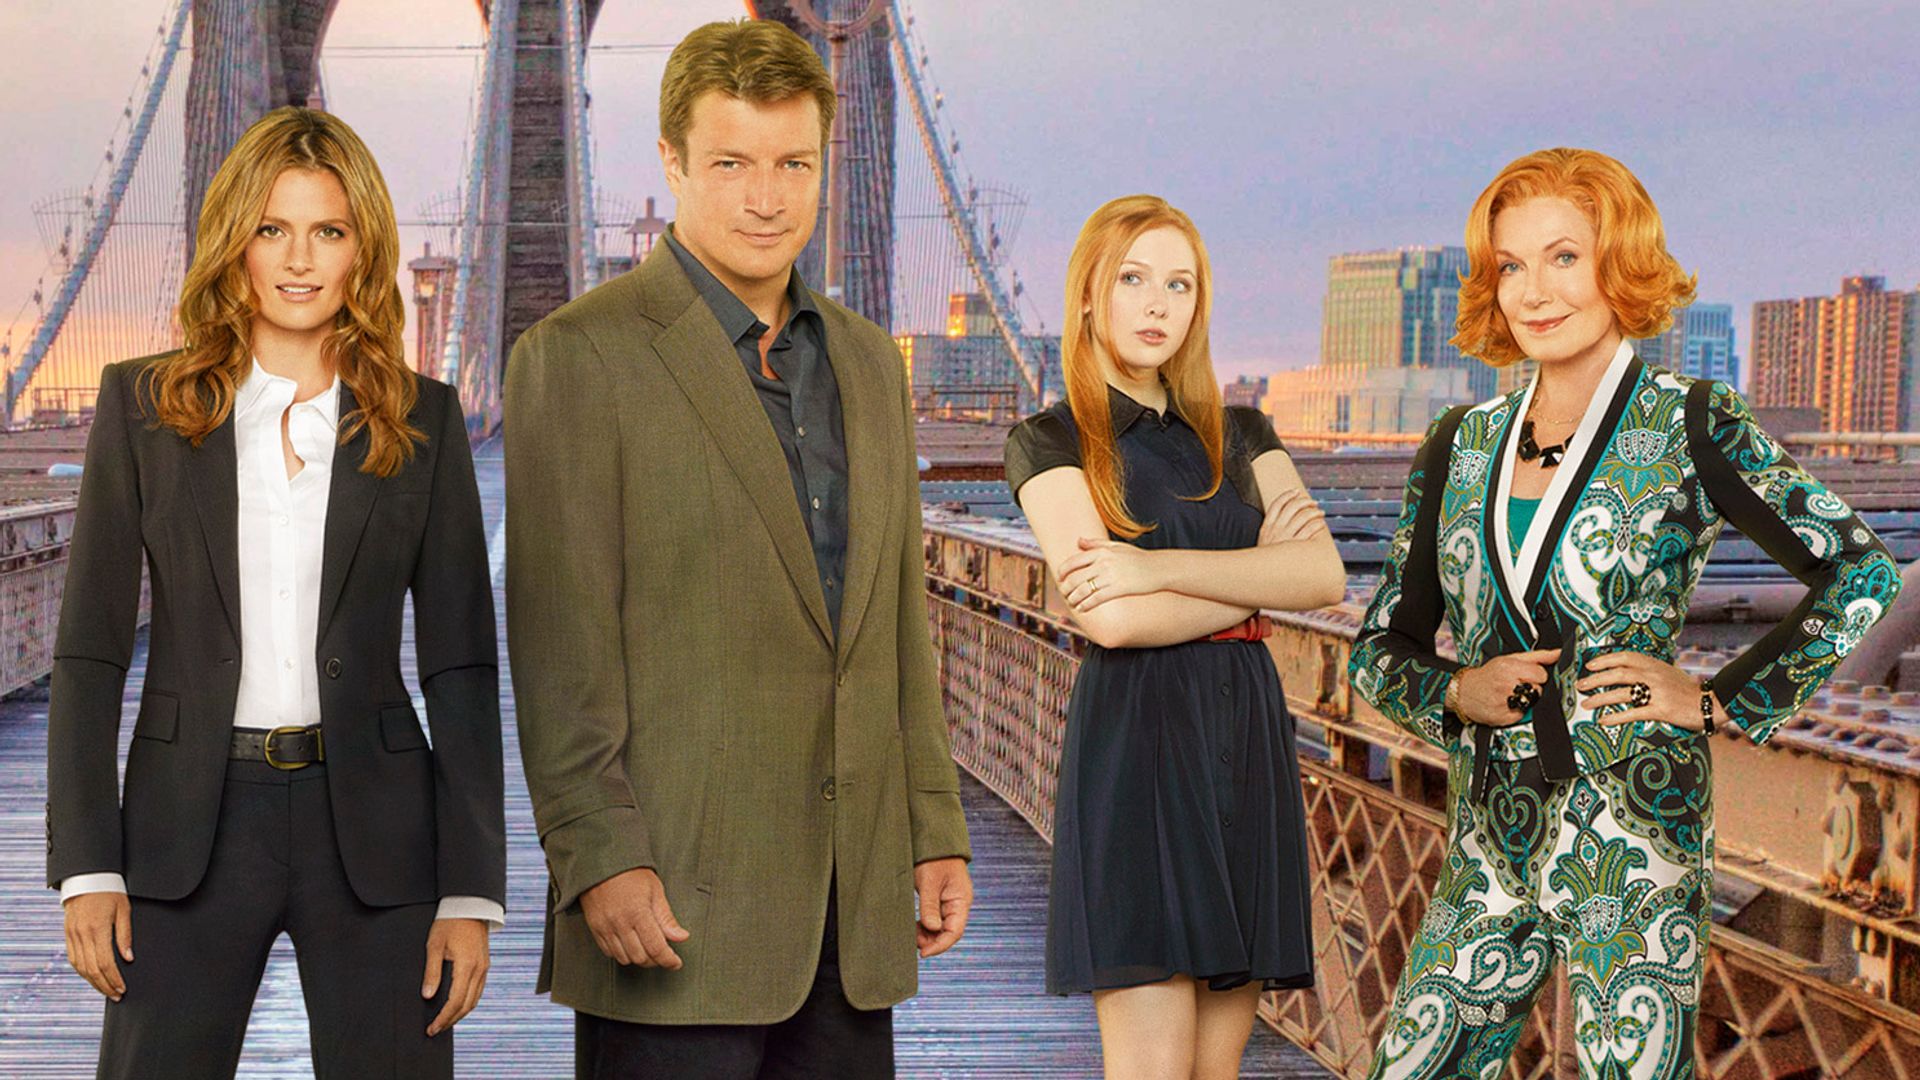 Nathan Fillion and the cast of Castle